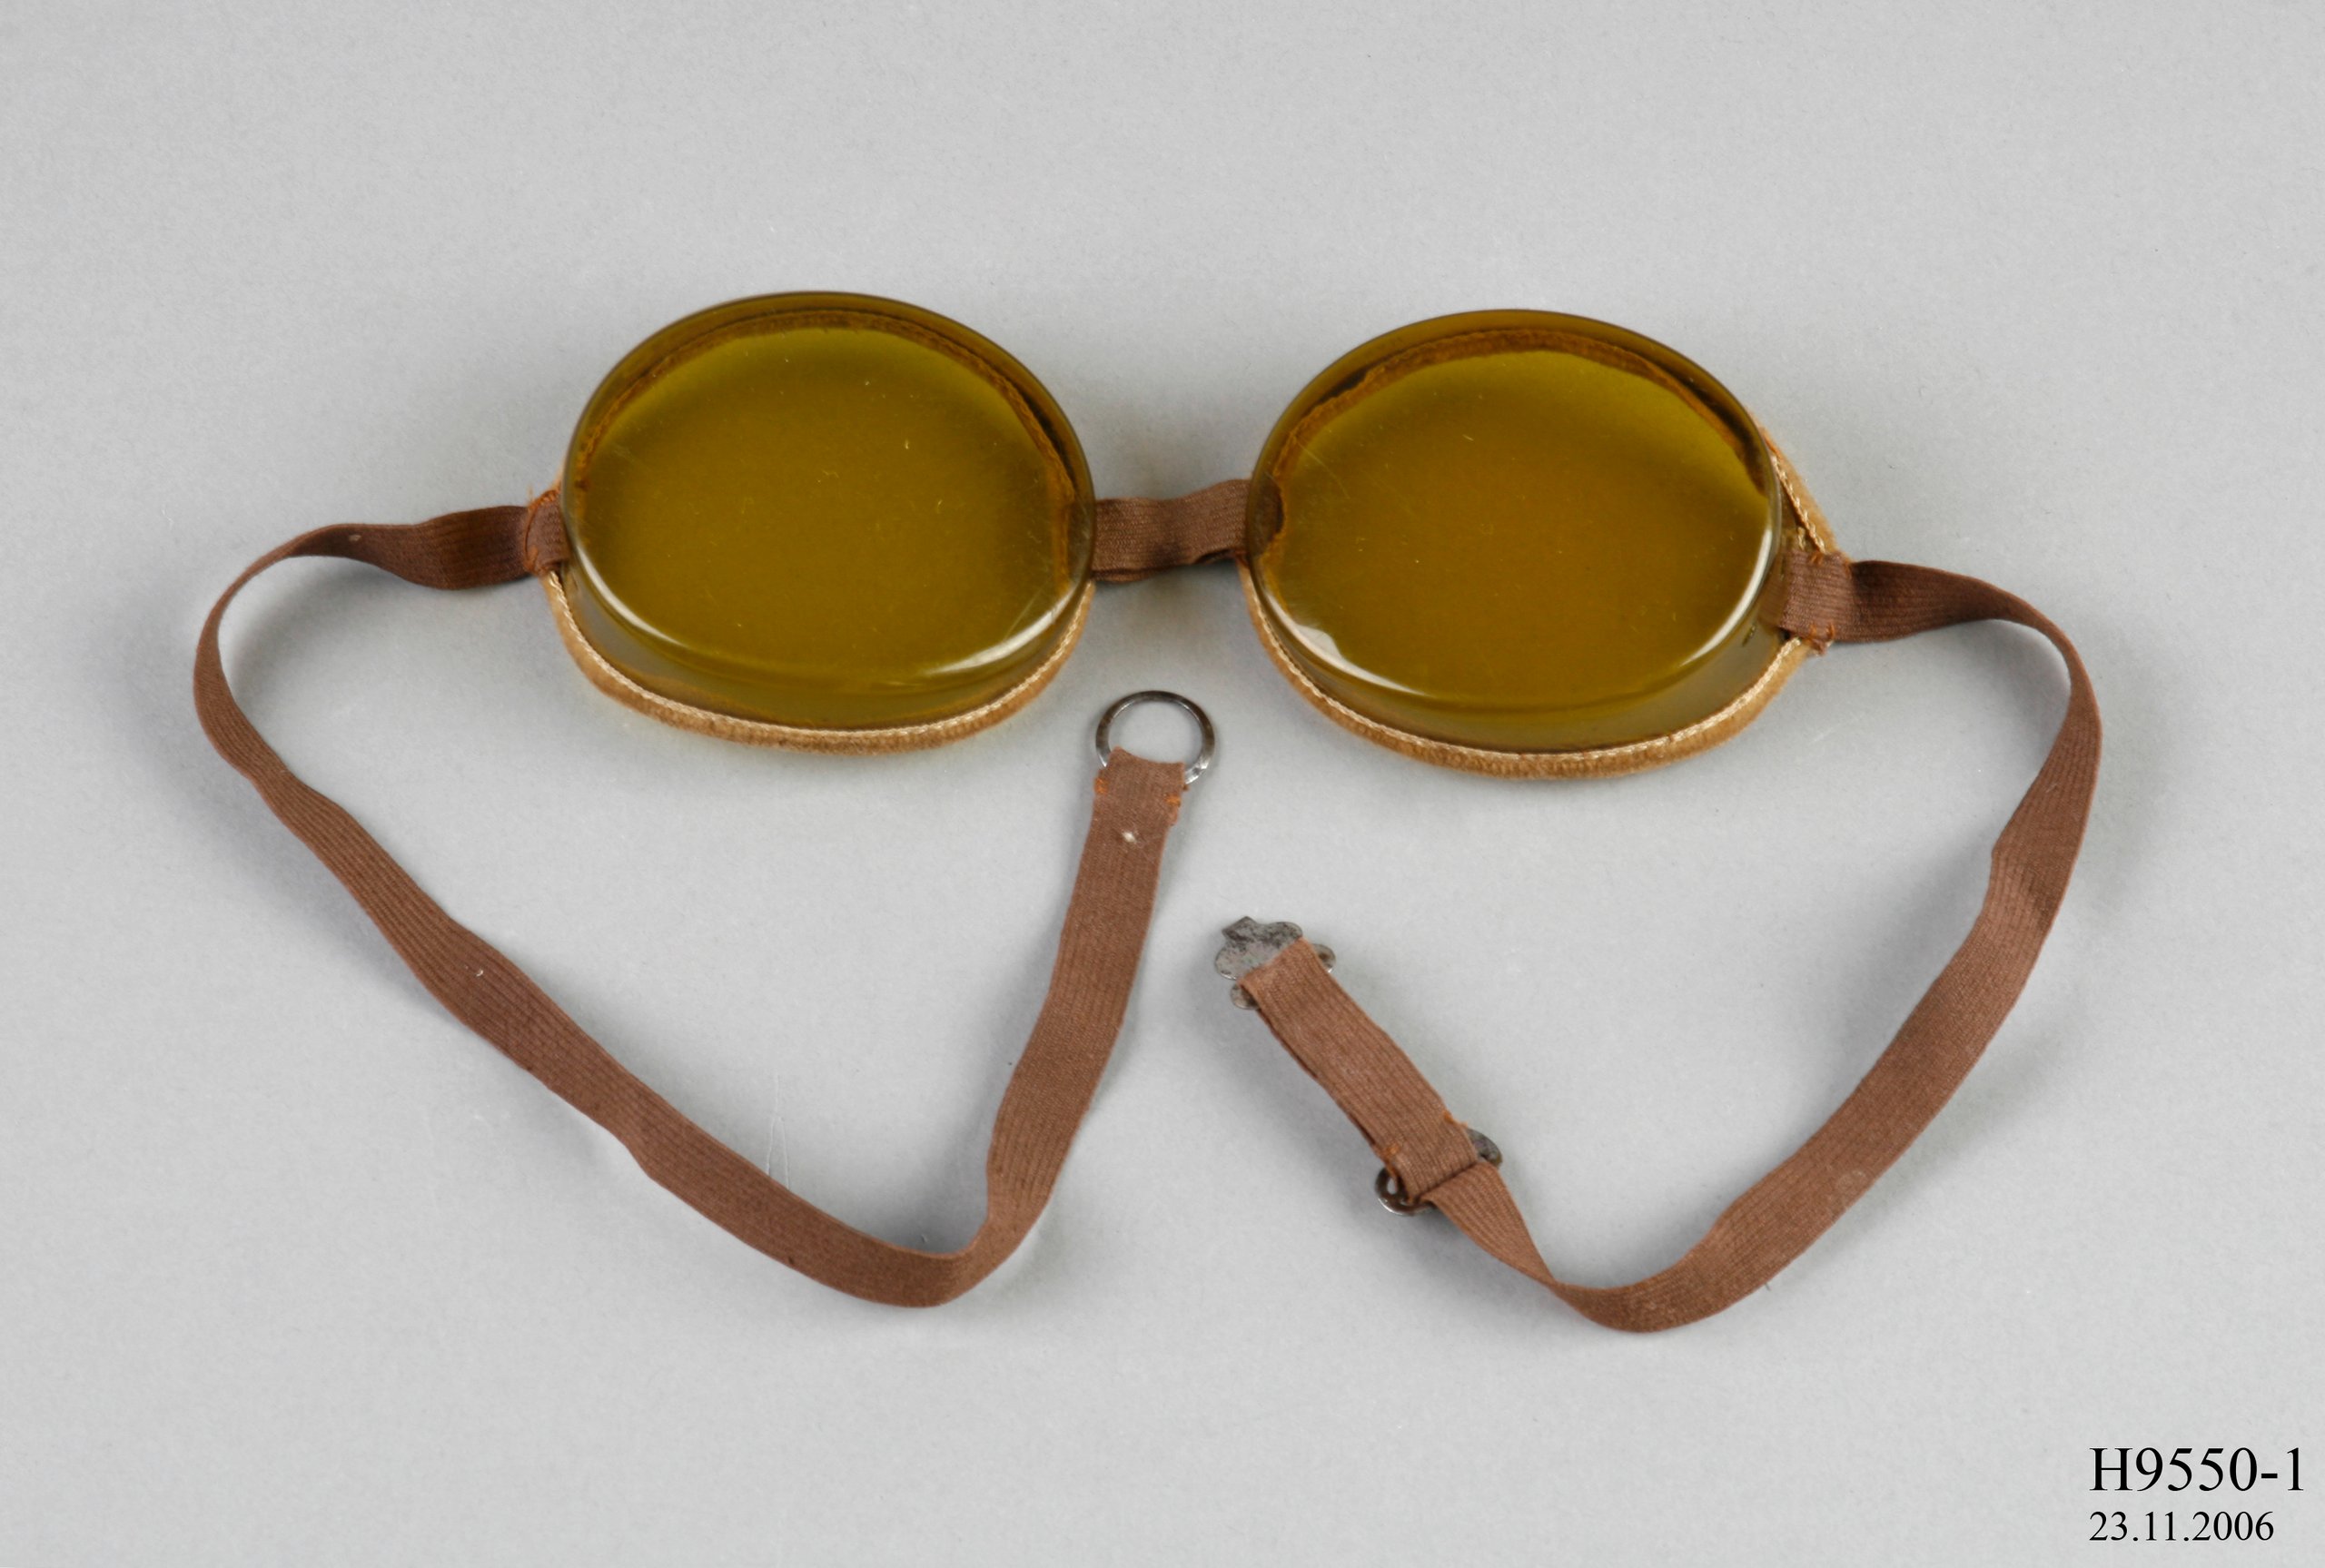 Goggles used in Mawson's Antarctic Expedition